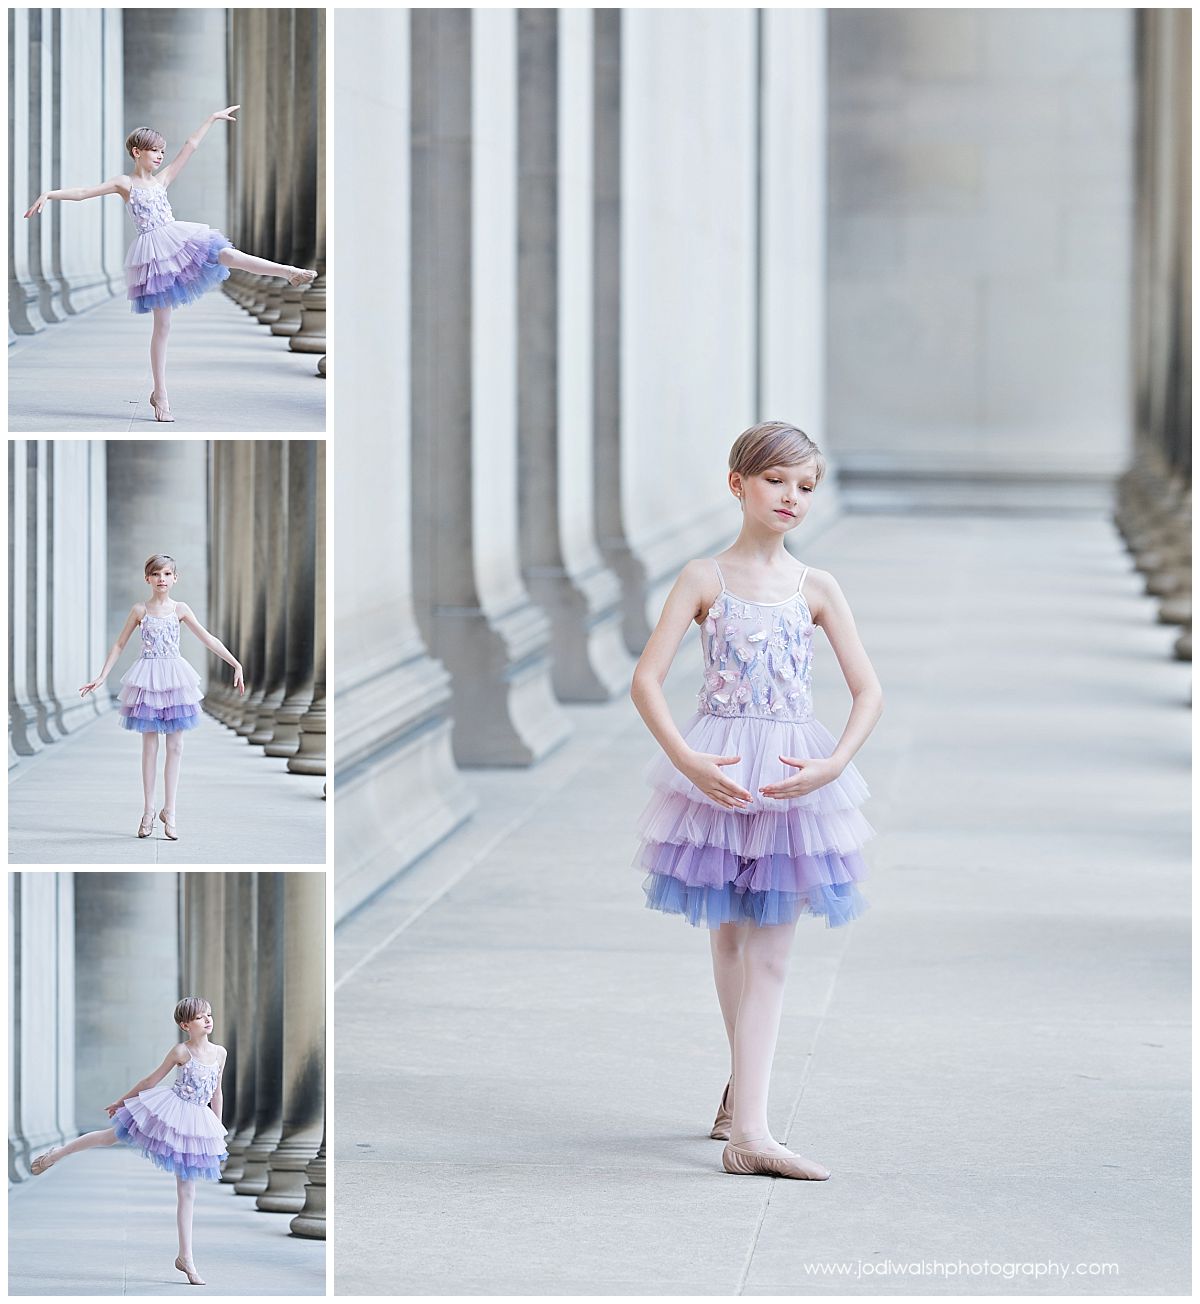 collage of images of a young girl with short blonde hair, wearing a pink and violet tulle dress, posed in a long hallway with stone columns